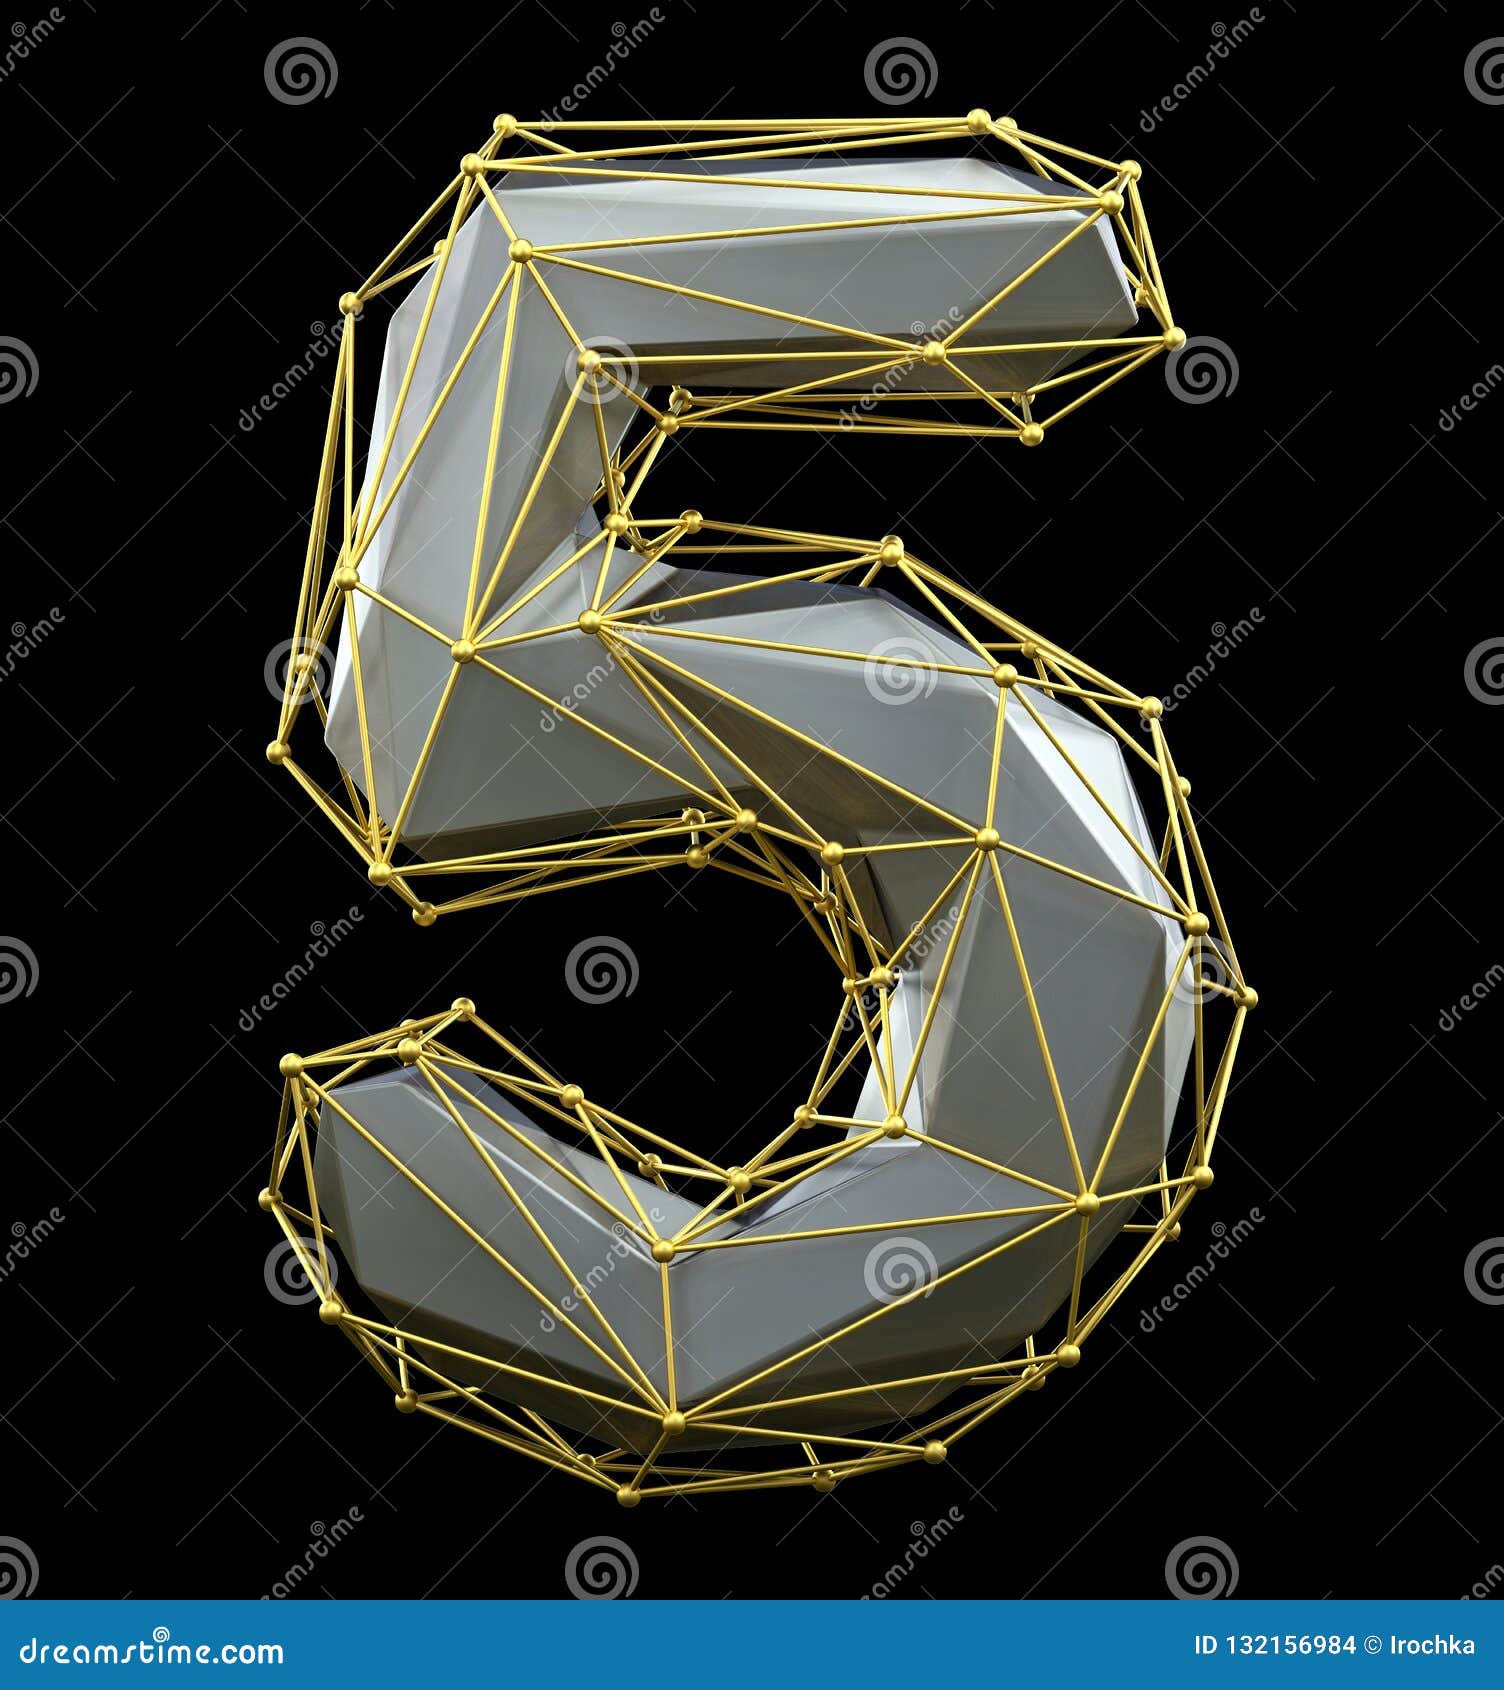  Low  Poly  Style Number 5  Silver And Gold Color Isolated On 